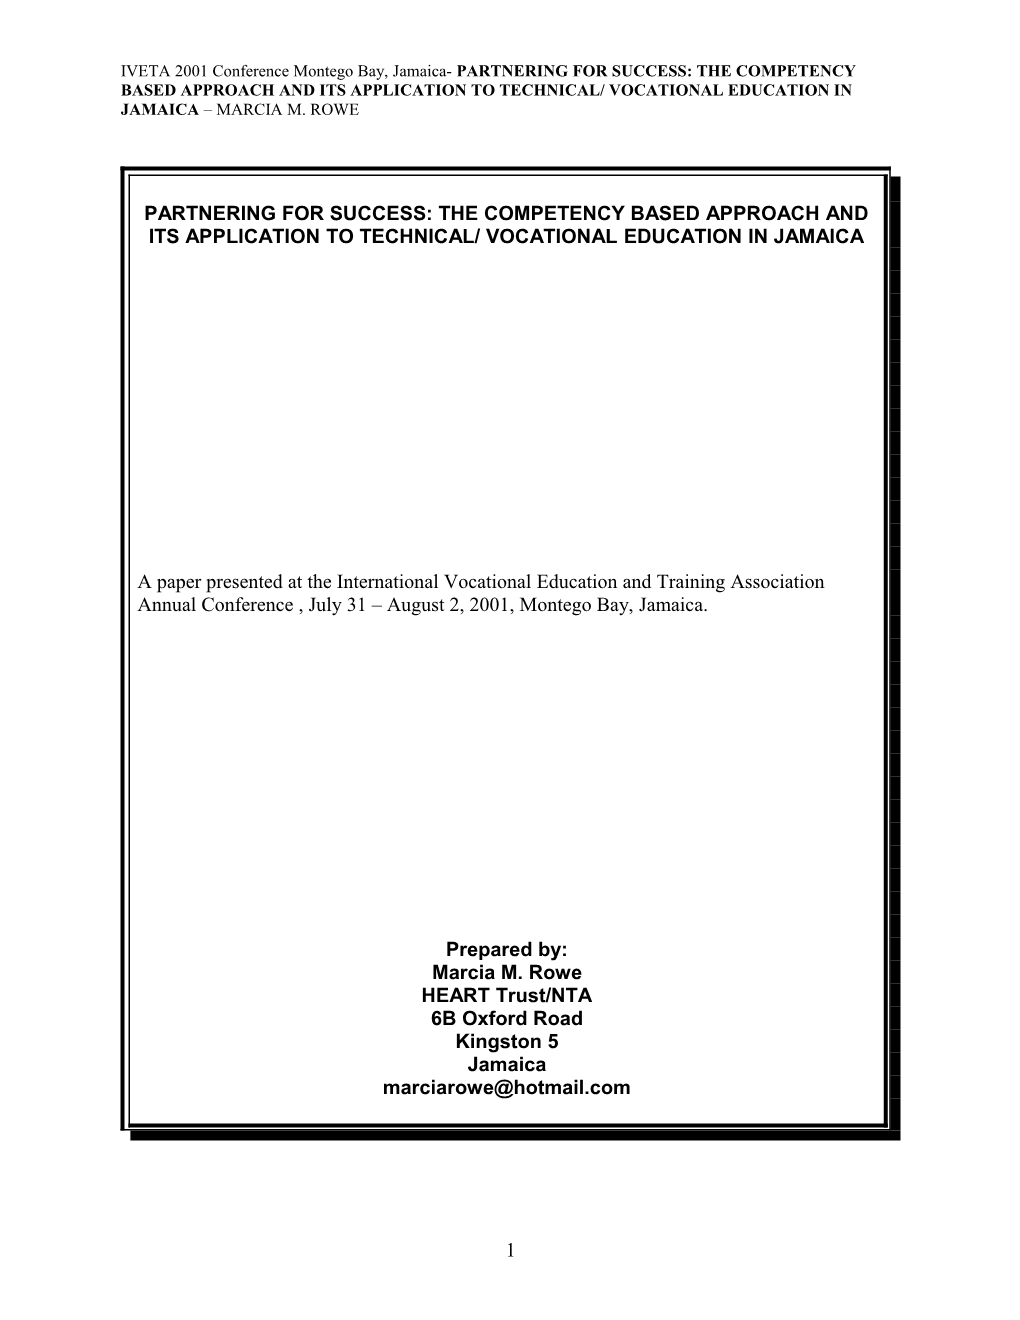 Partenering for Success: the Competency Based Approach and Its Application to Technical